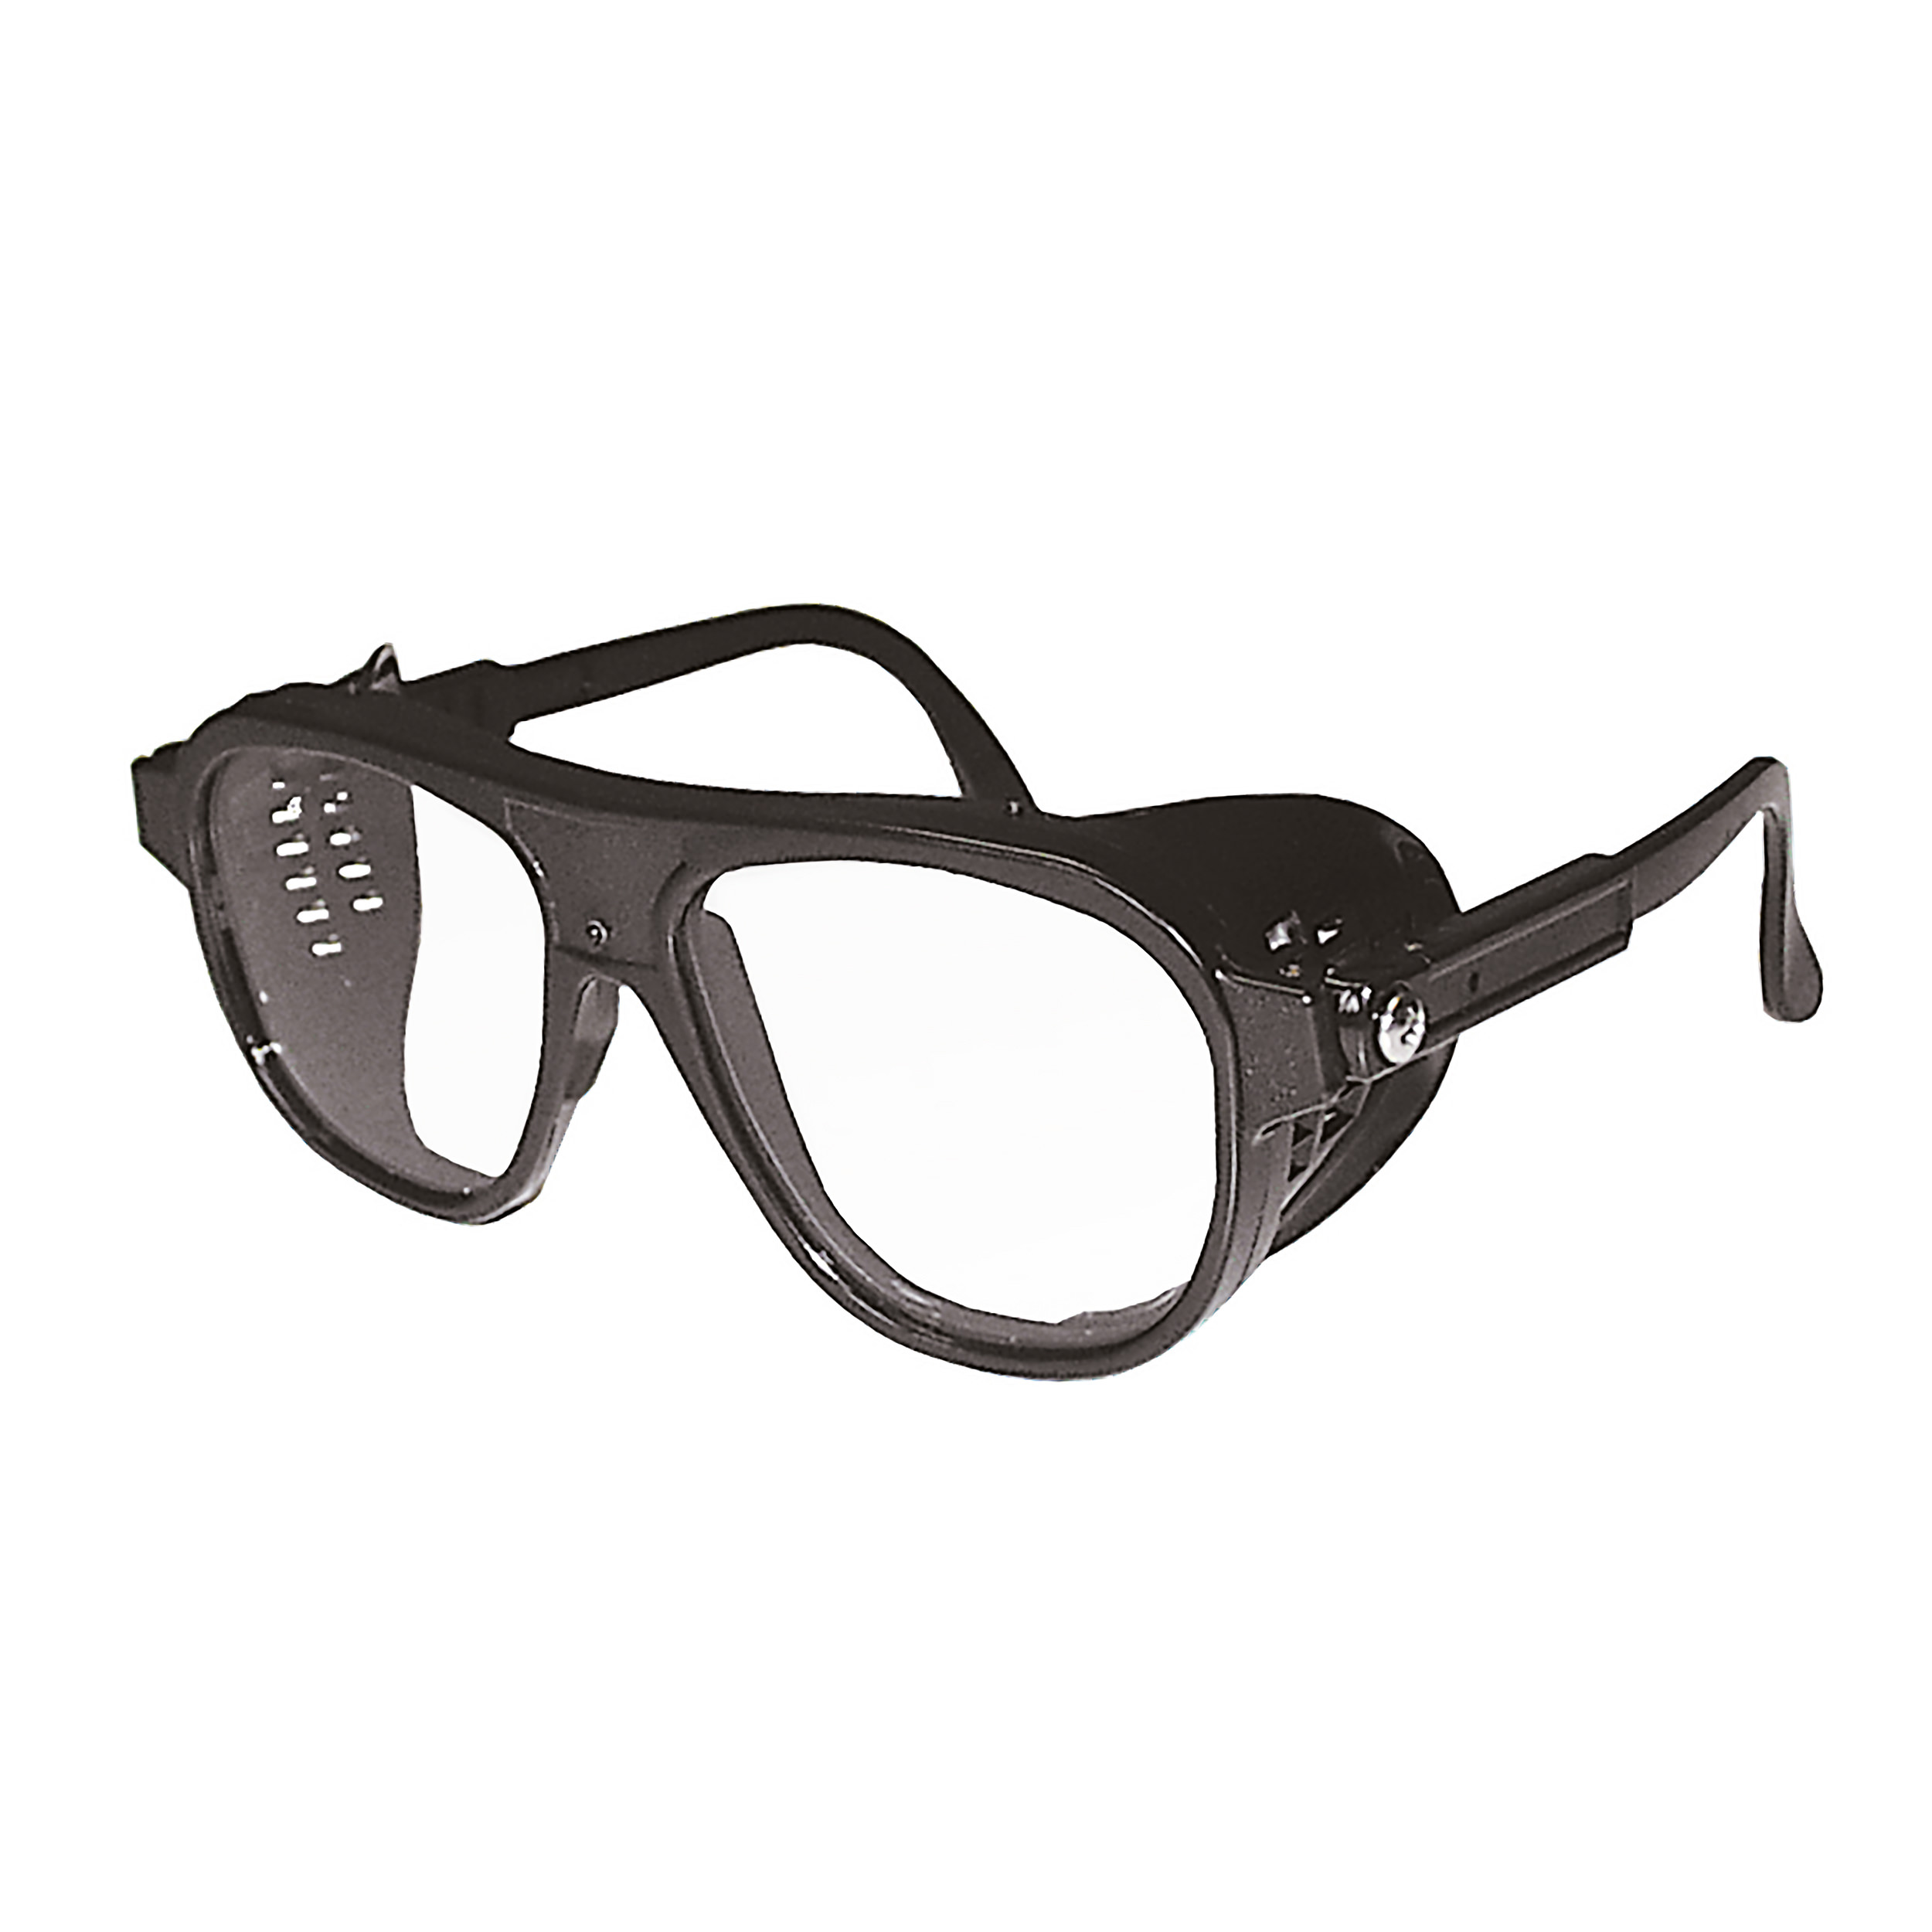 Nylon safety glasses with adjustable temples